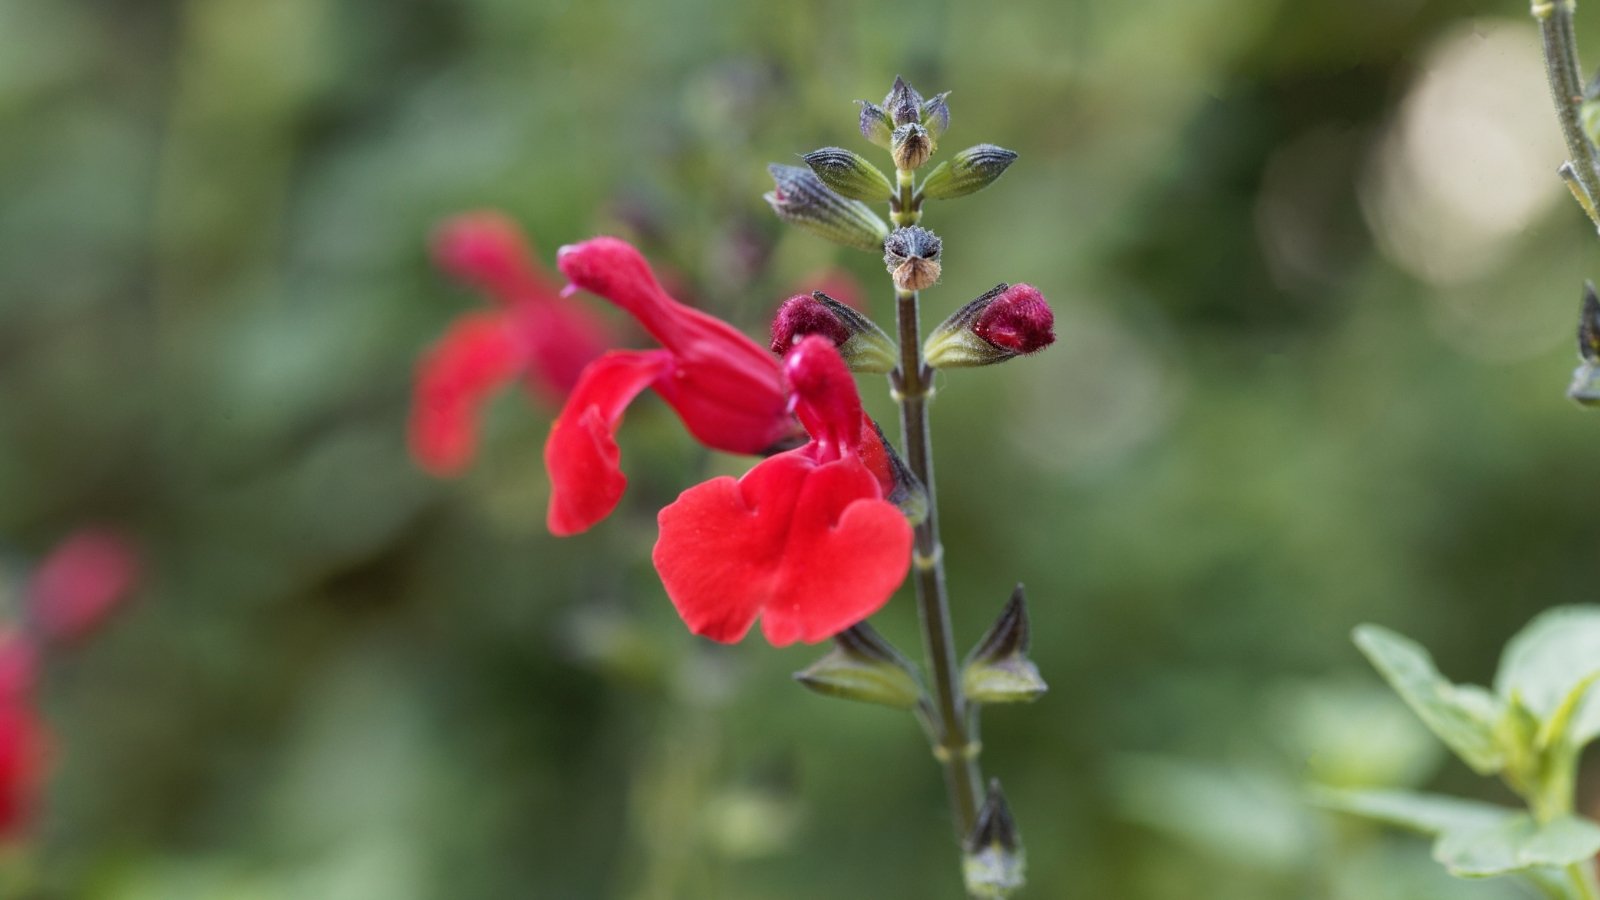 Salvia greggii boasts clusters of small, tubular flowers in hues of red on a blurred green background.